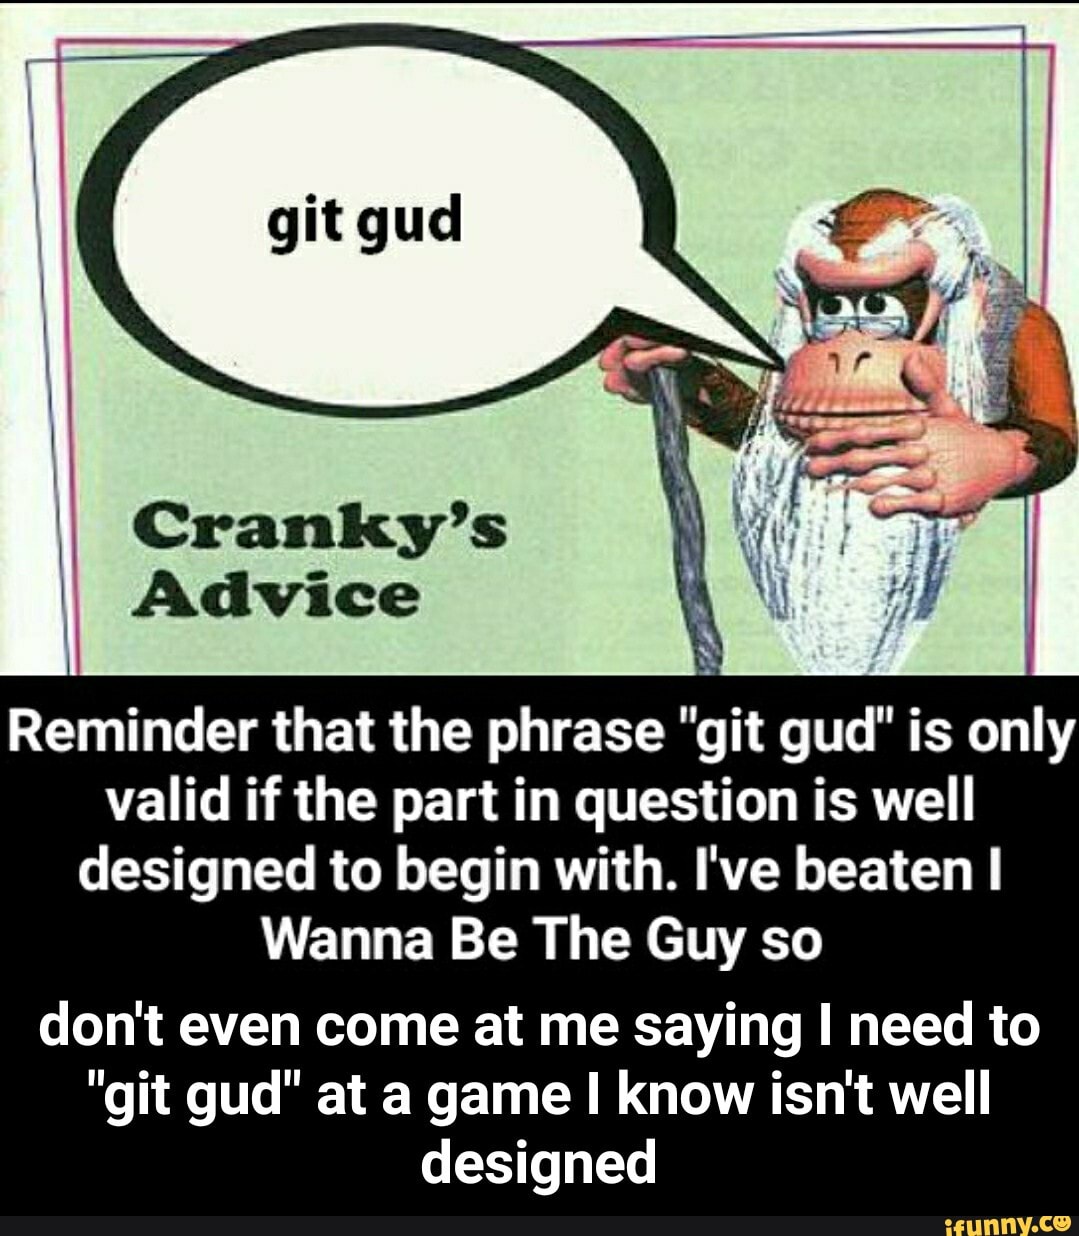 Git gud” was never about - Ranni finna make me act up